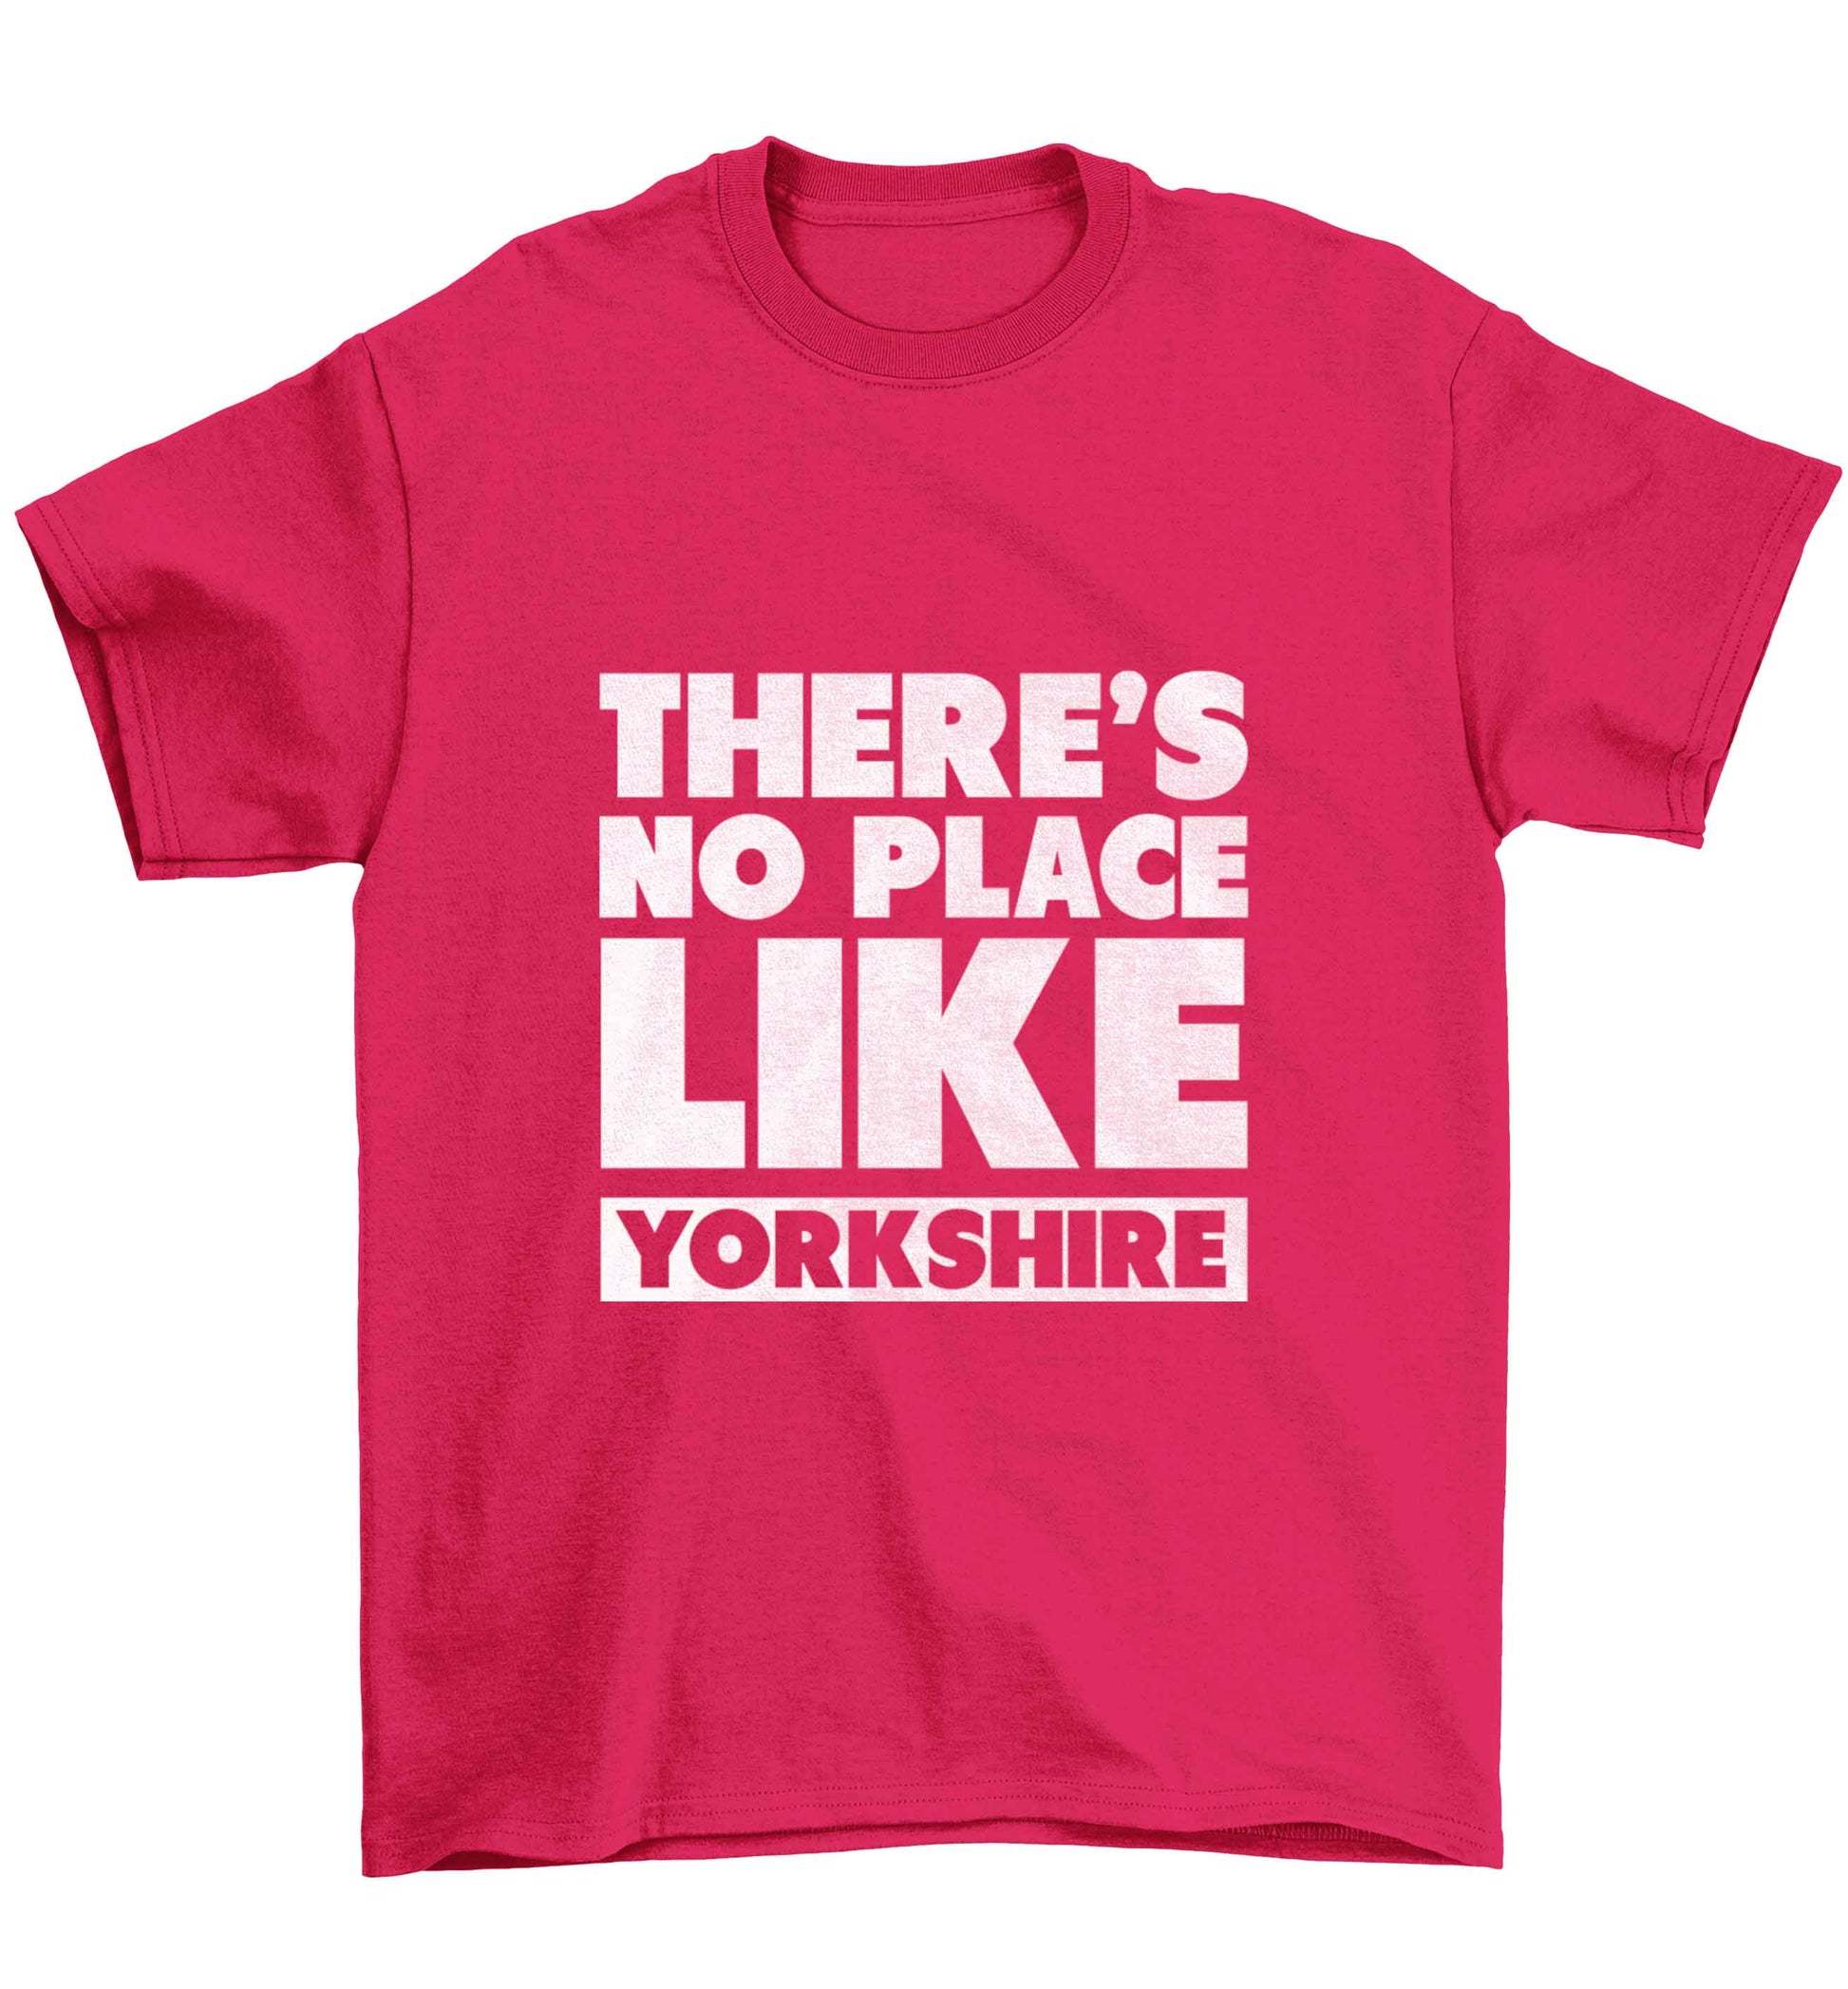 There's no place like Yorkshire Children's pink Tshirt 12-13 Years